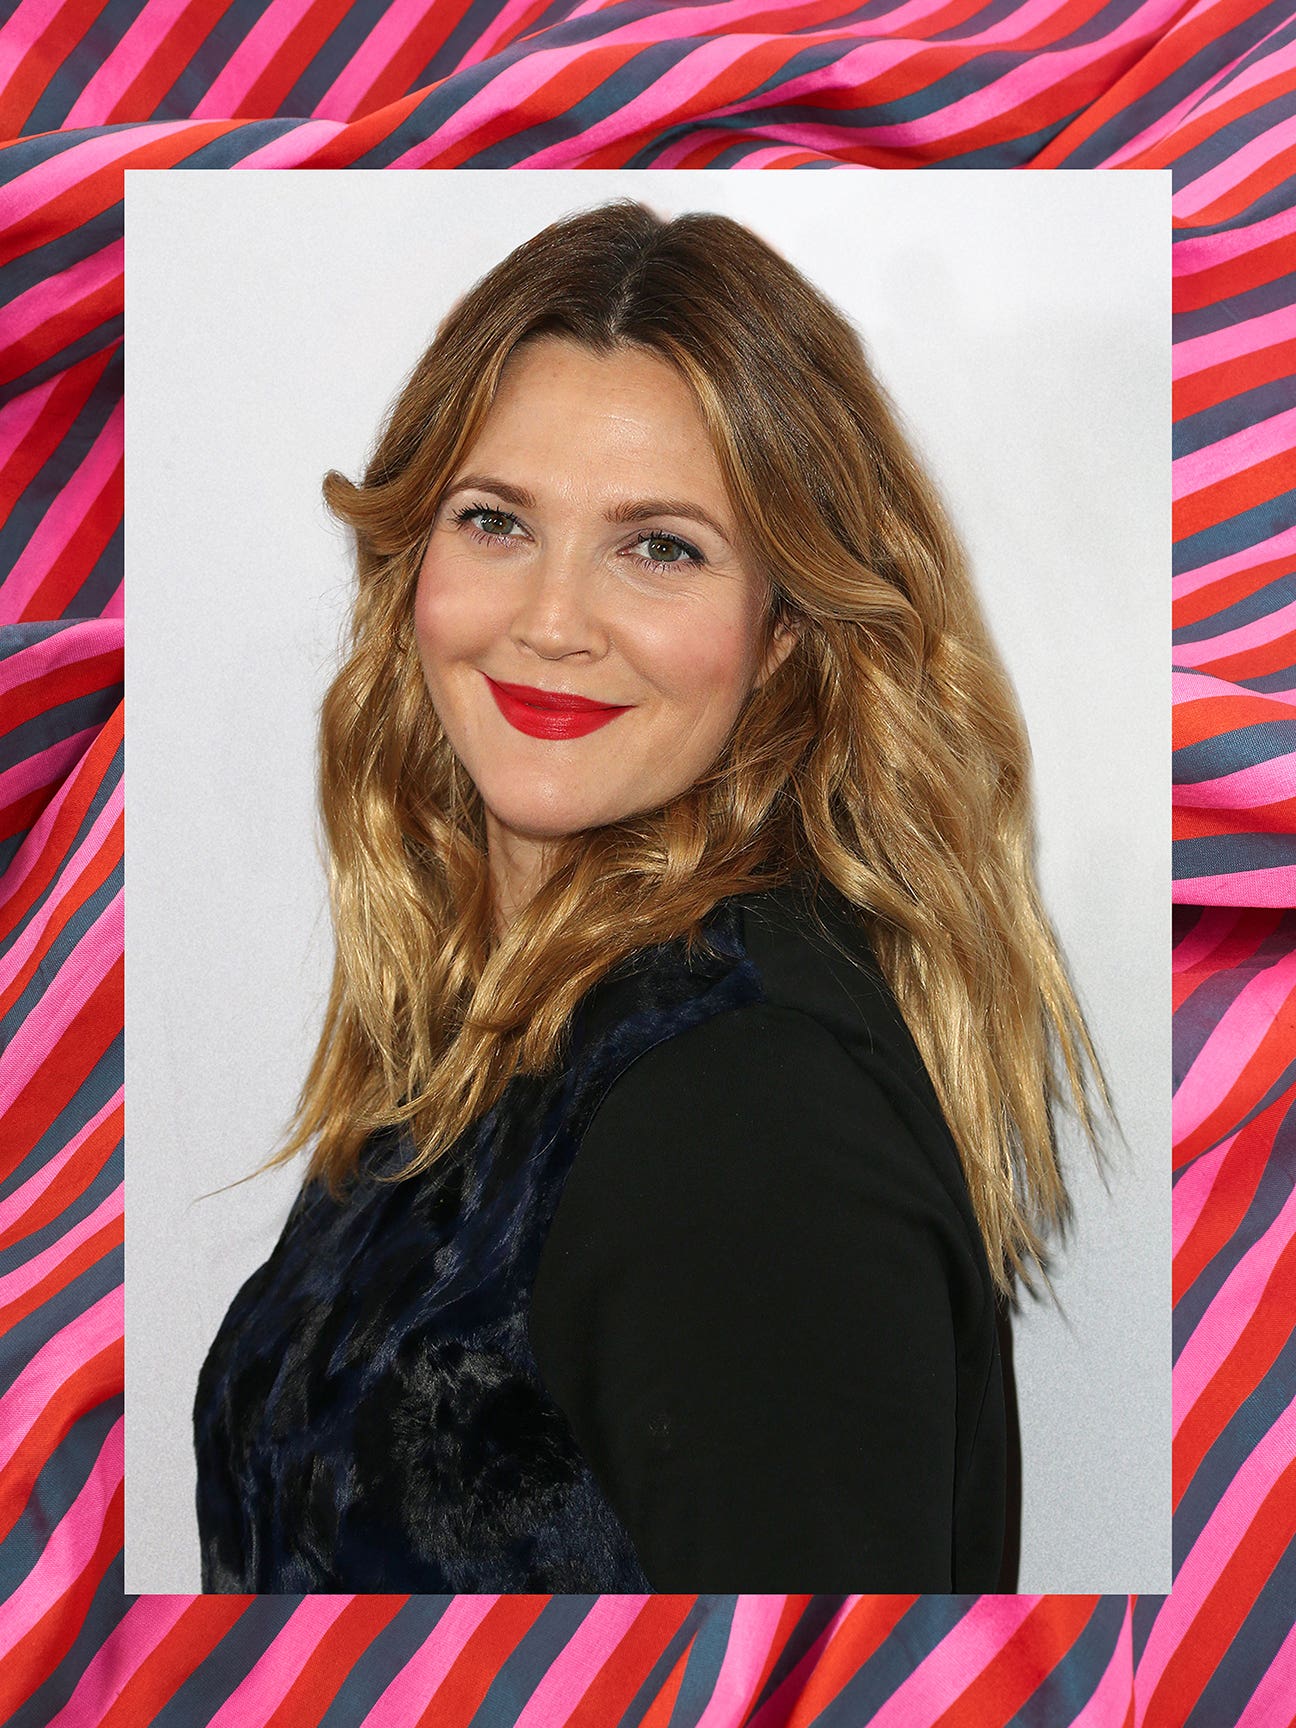 drew barrymore against a pink background